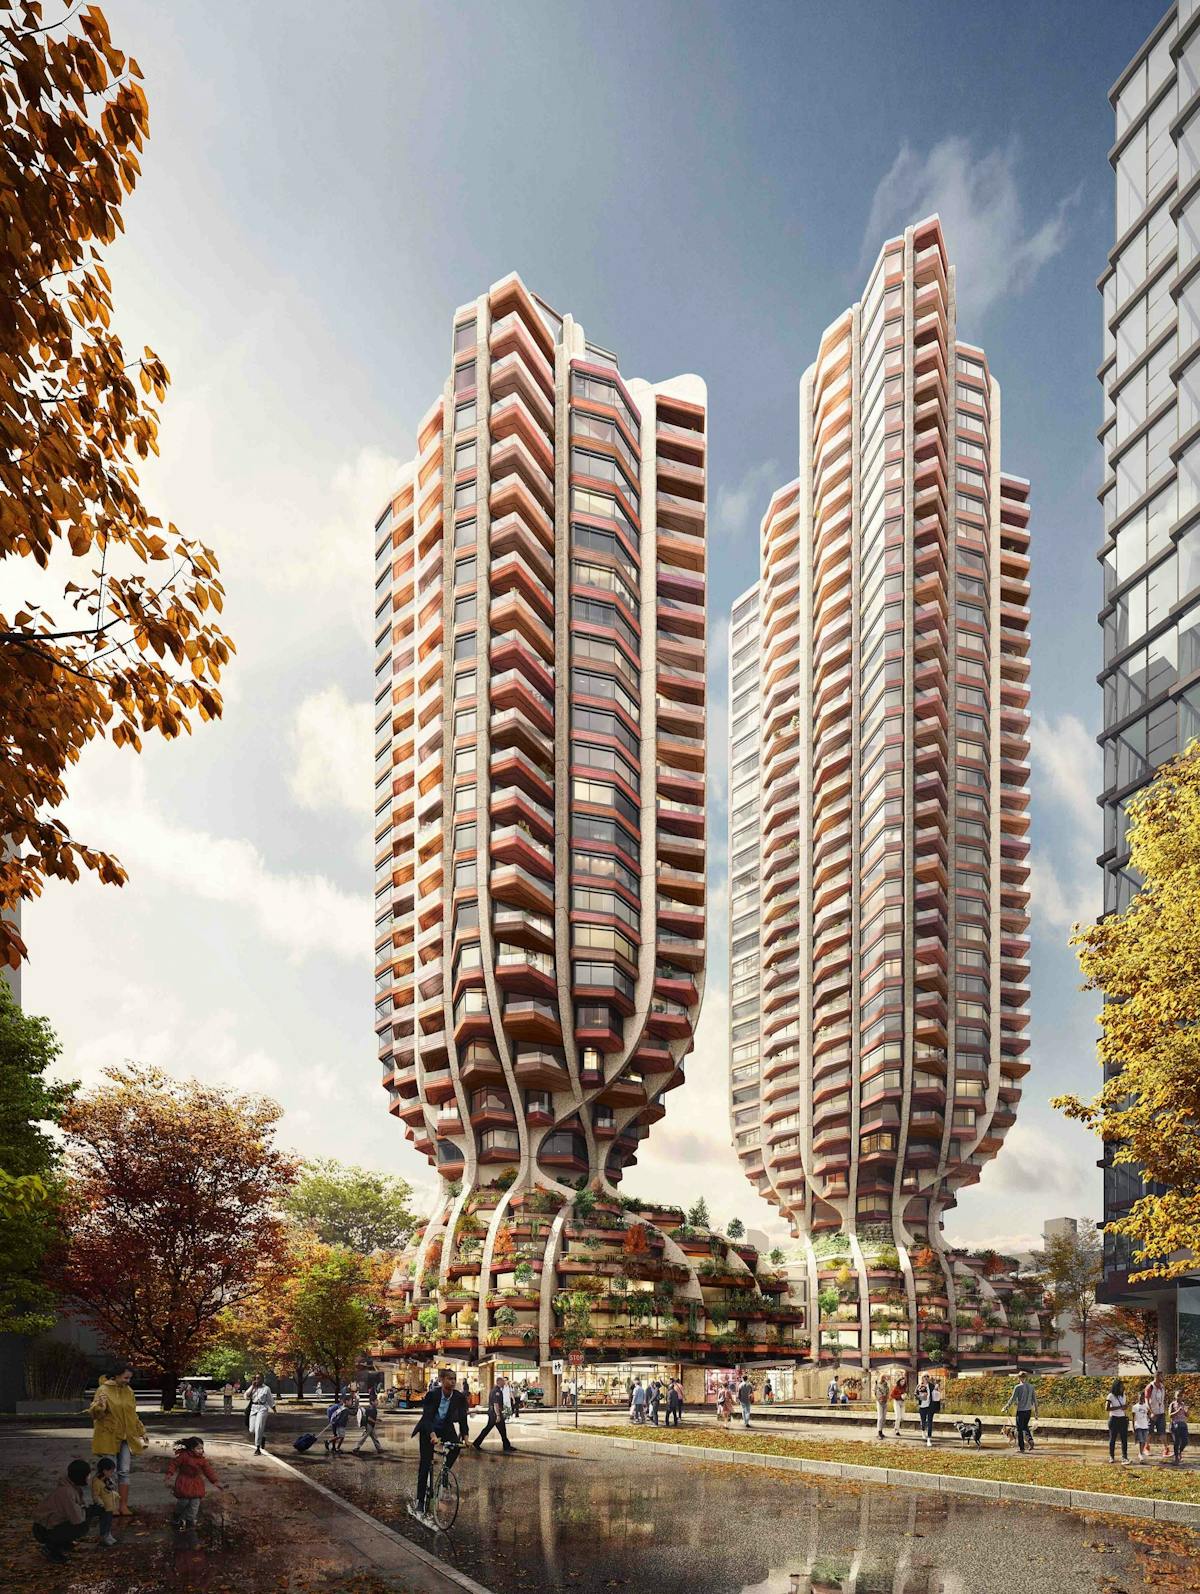 Heatherwick Studio shares the latest visual for their new residential tower proposal for Vancouver